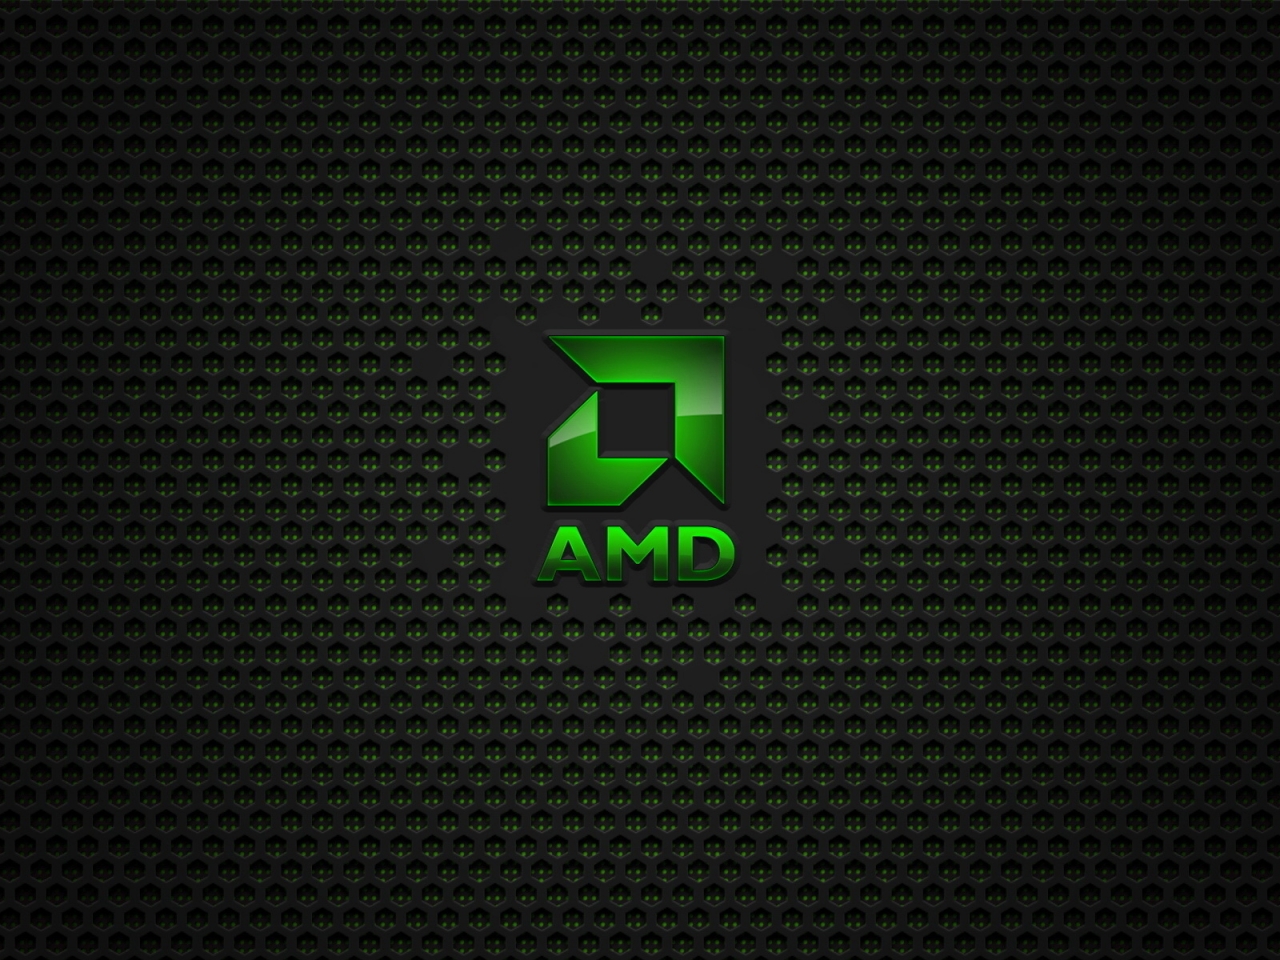 AMD for 1280 x 960 resolution